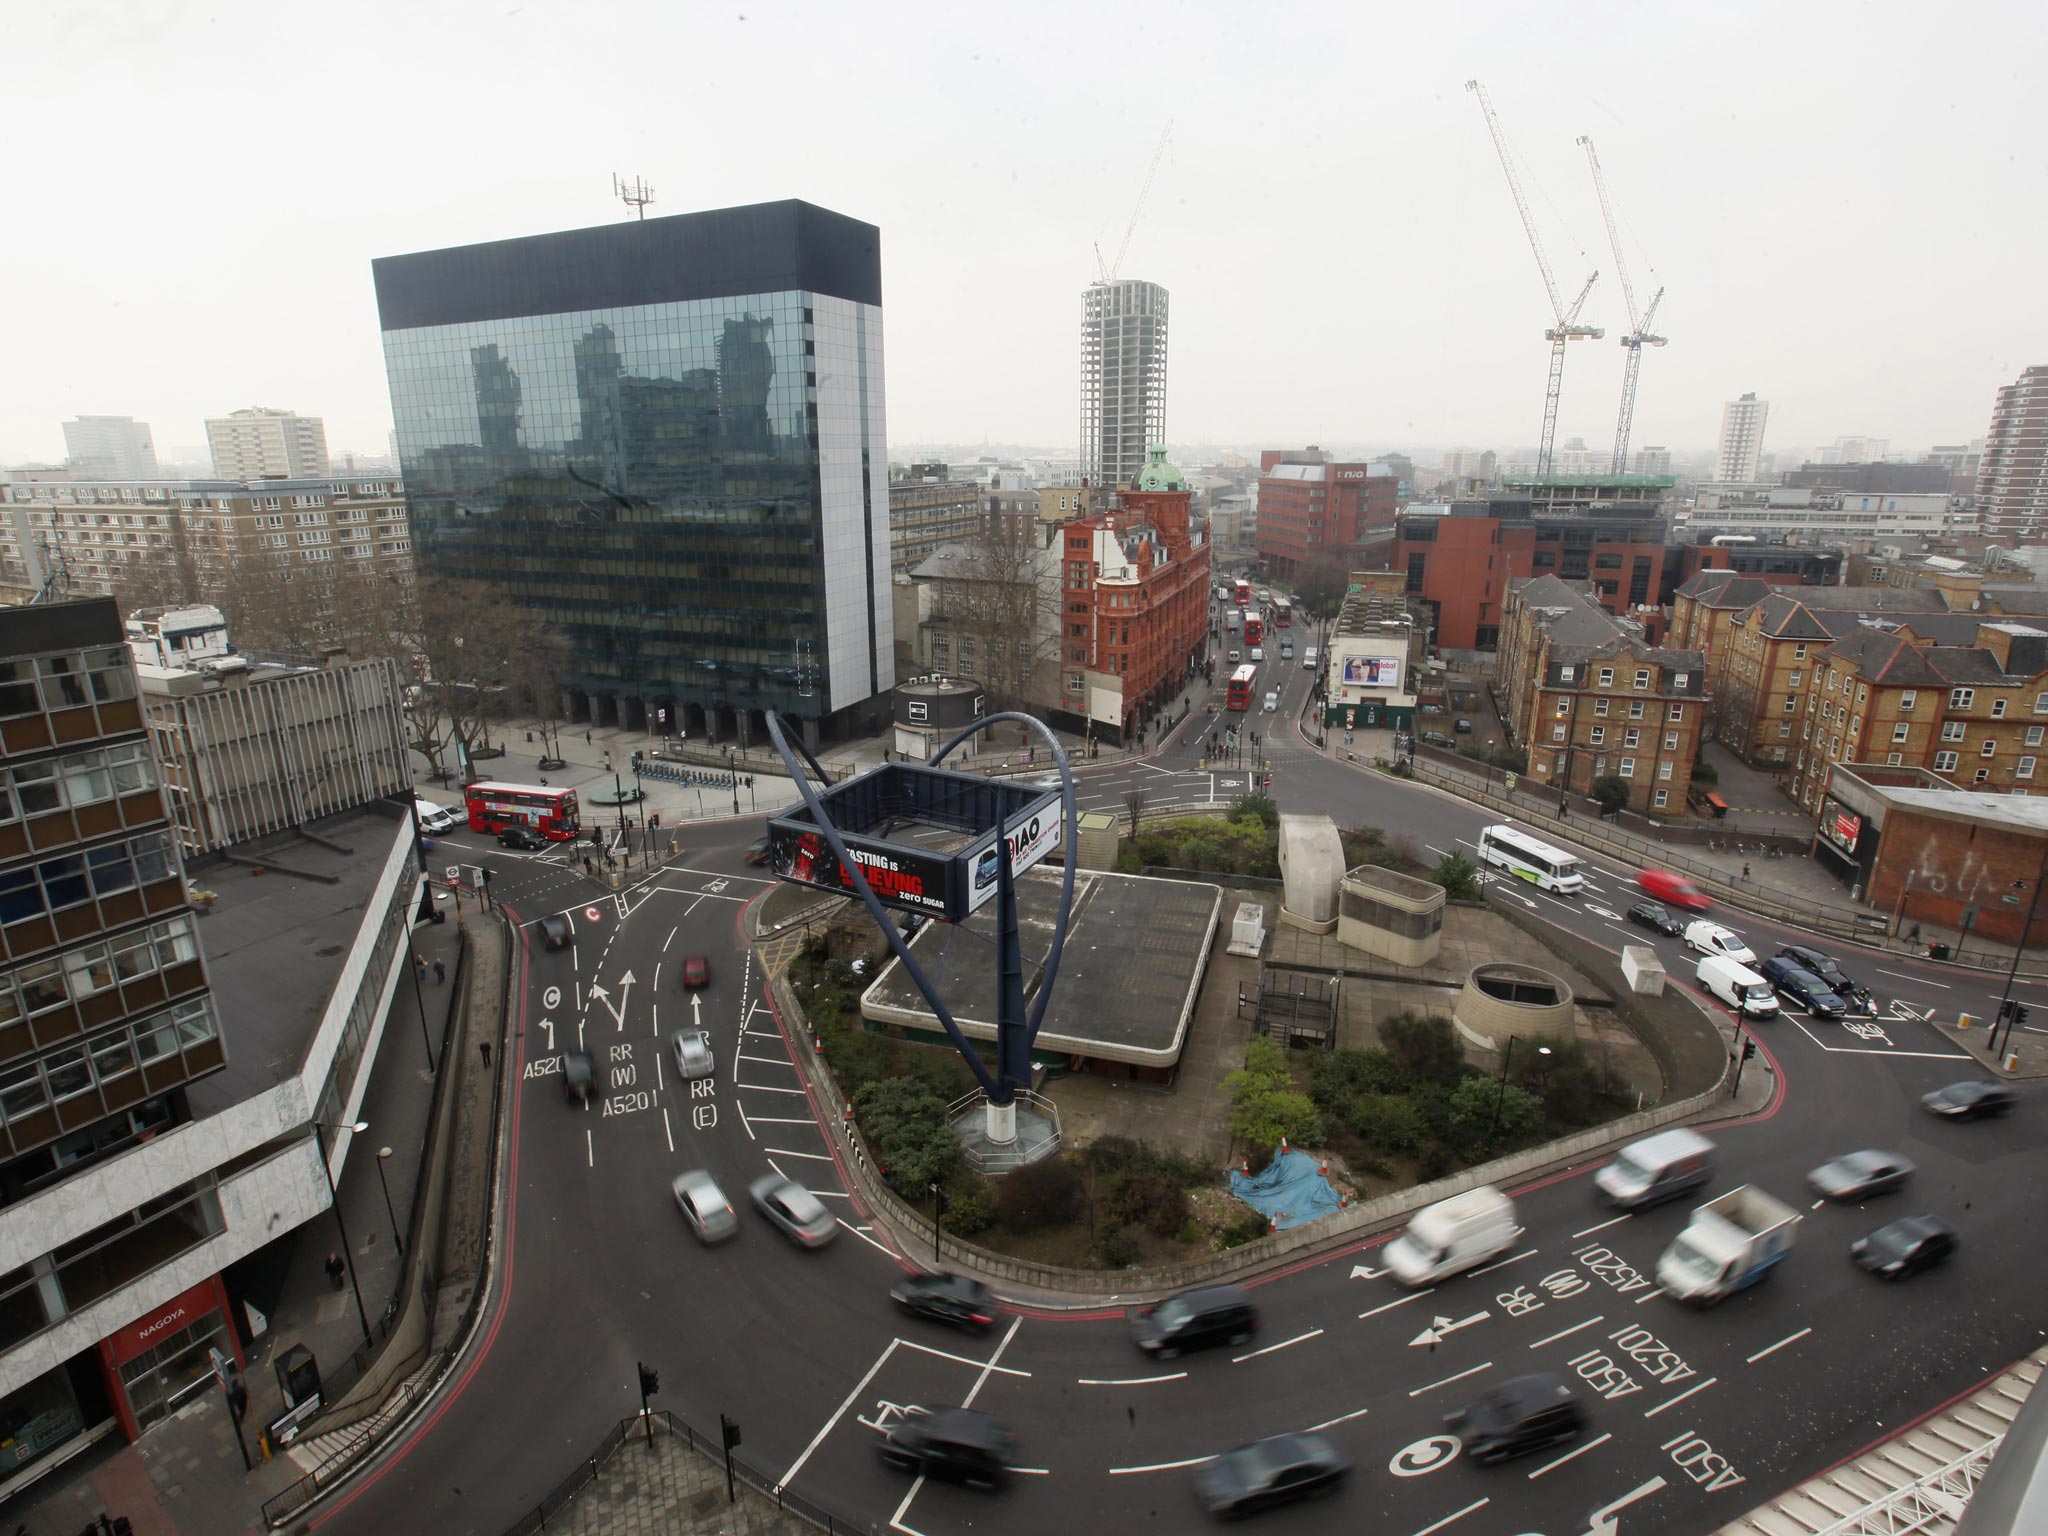 Tech City, the three-year-old cluster of hi-tech companies situated in East London